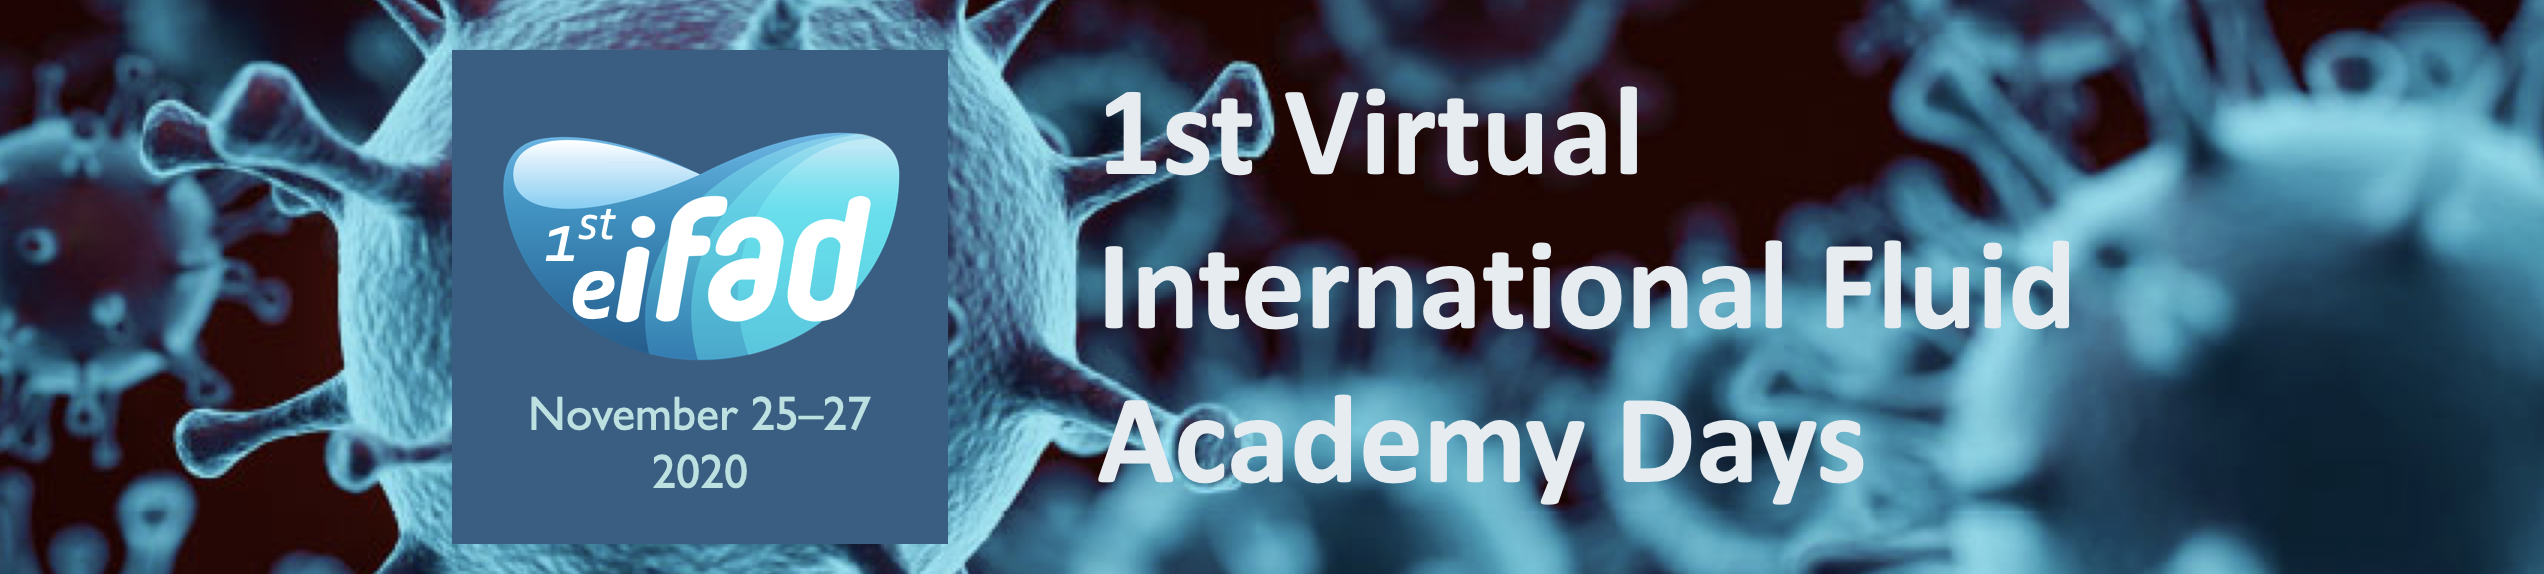 The banner to welcome you to Virtual International Fluid Academy Days 